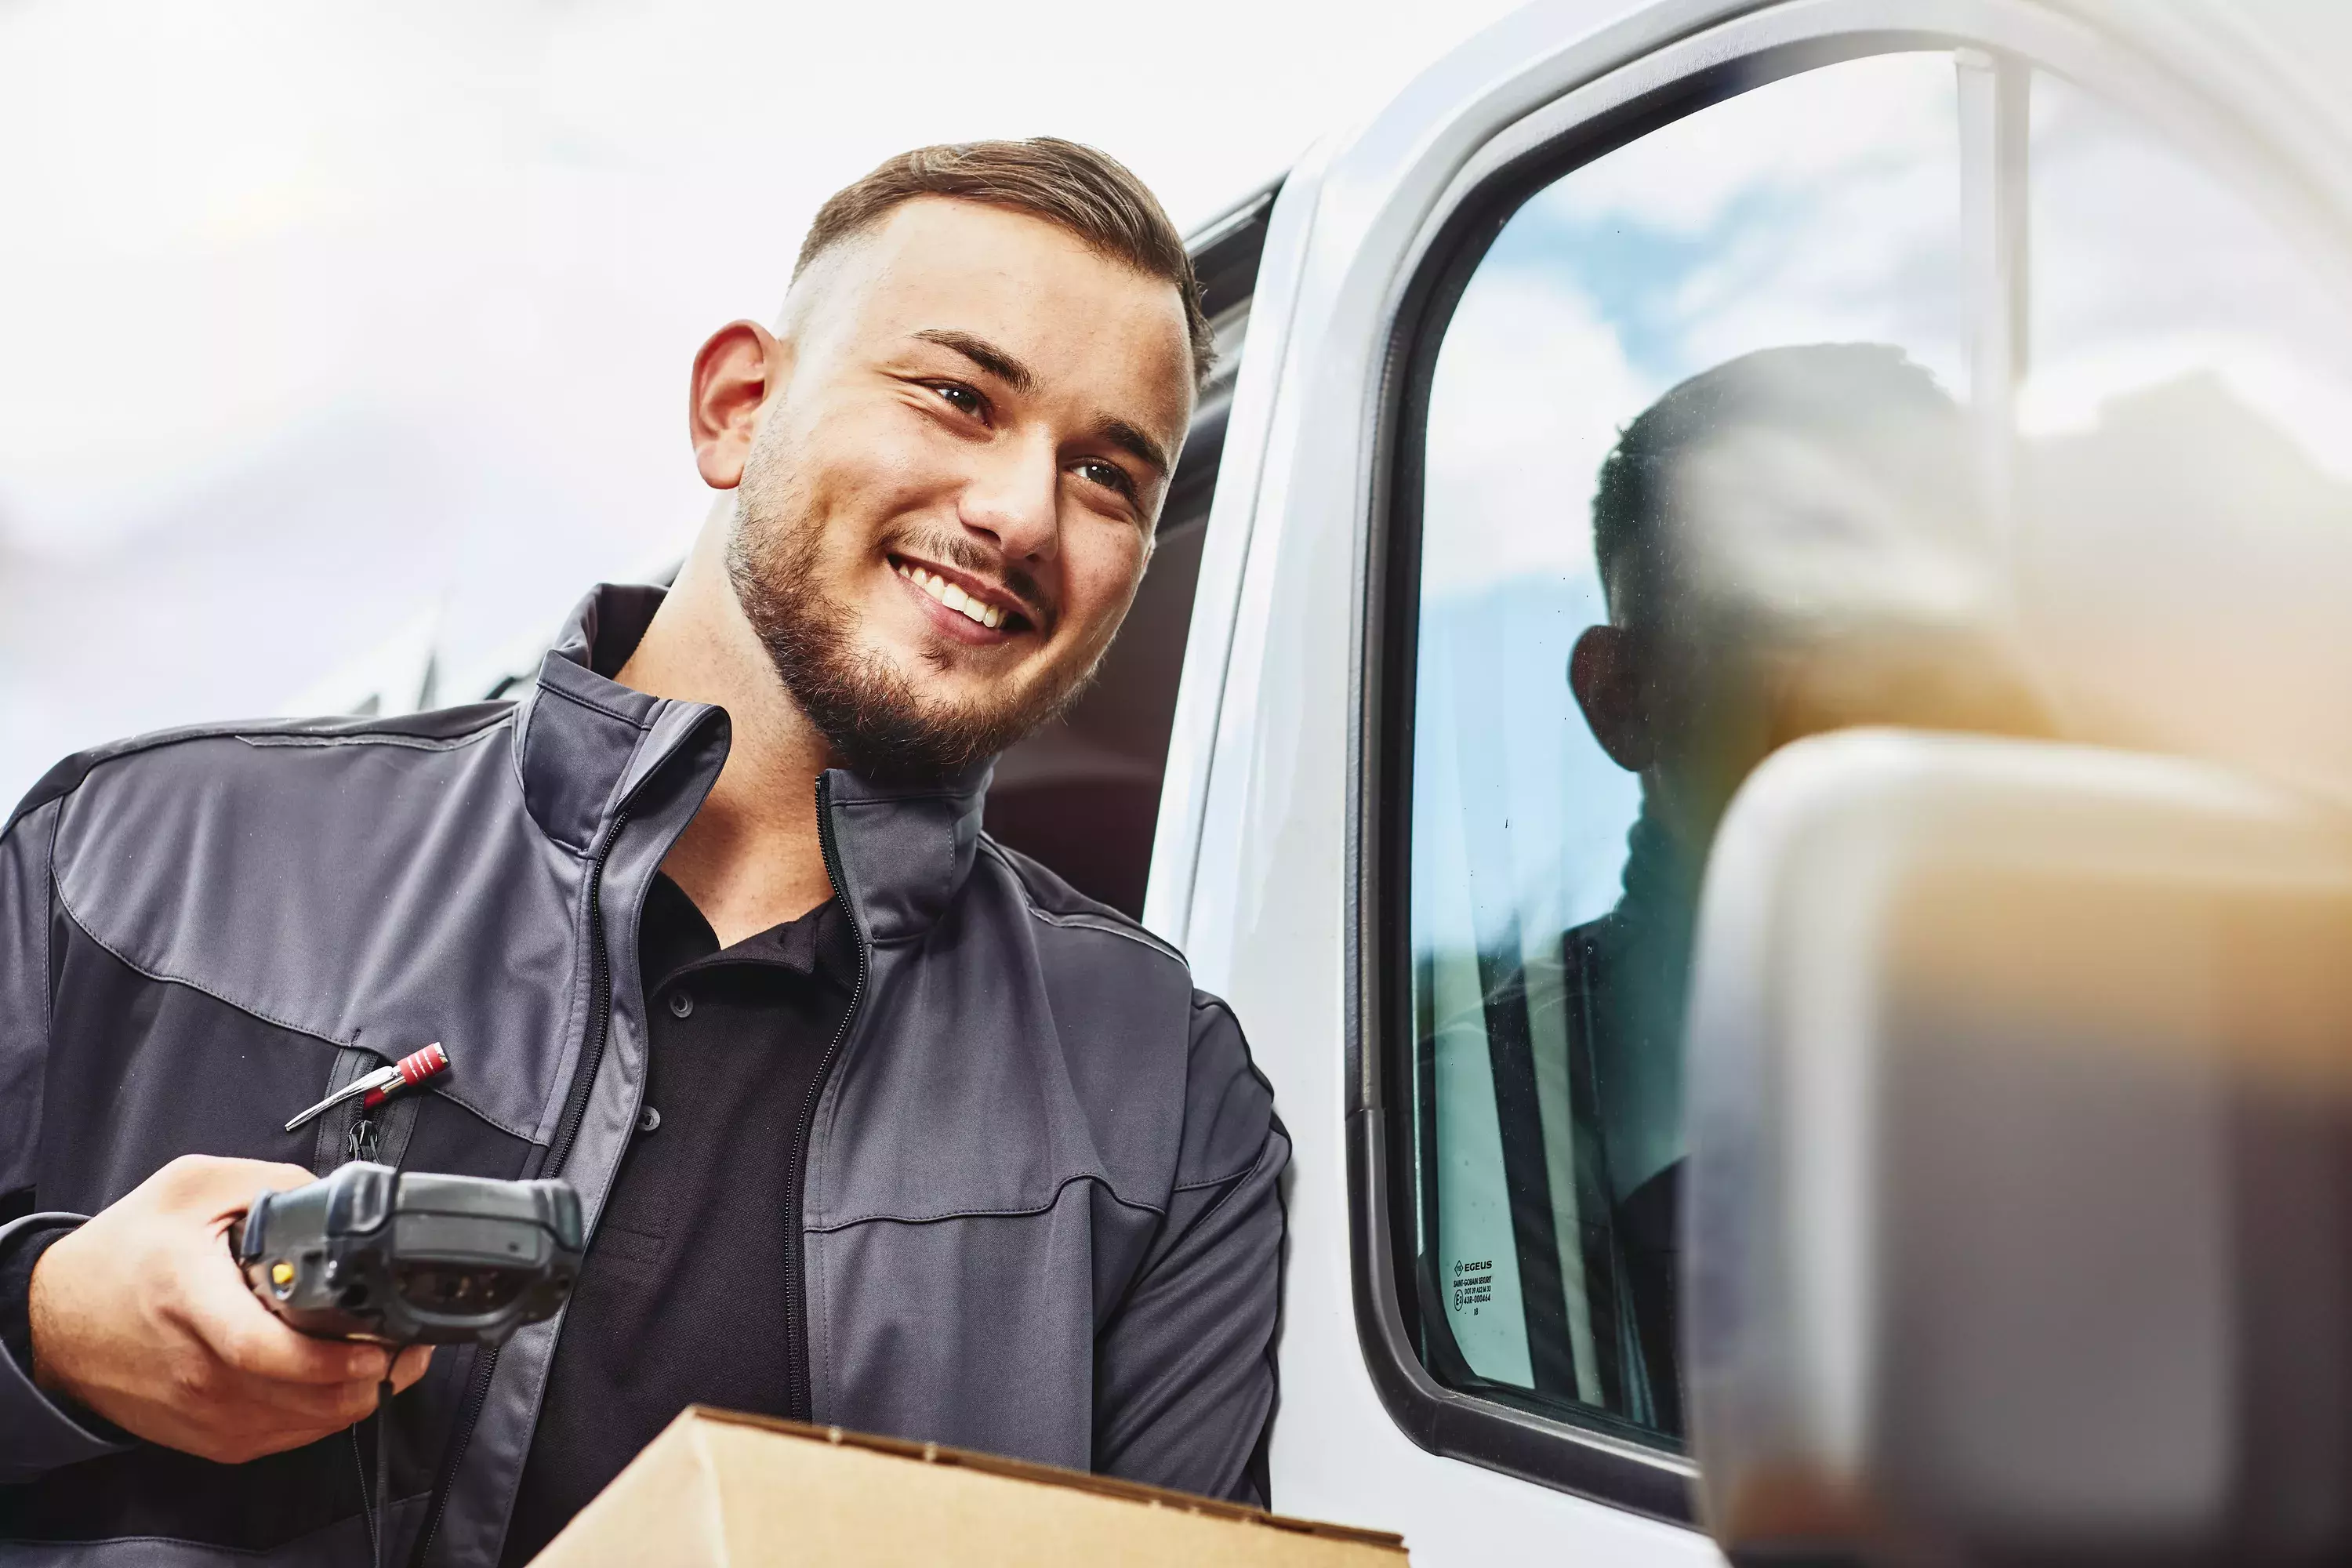 Close up - Smiling male holding a scanner and package standing next to a delivery van.
